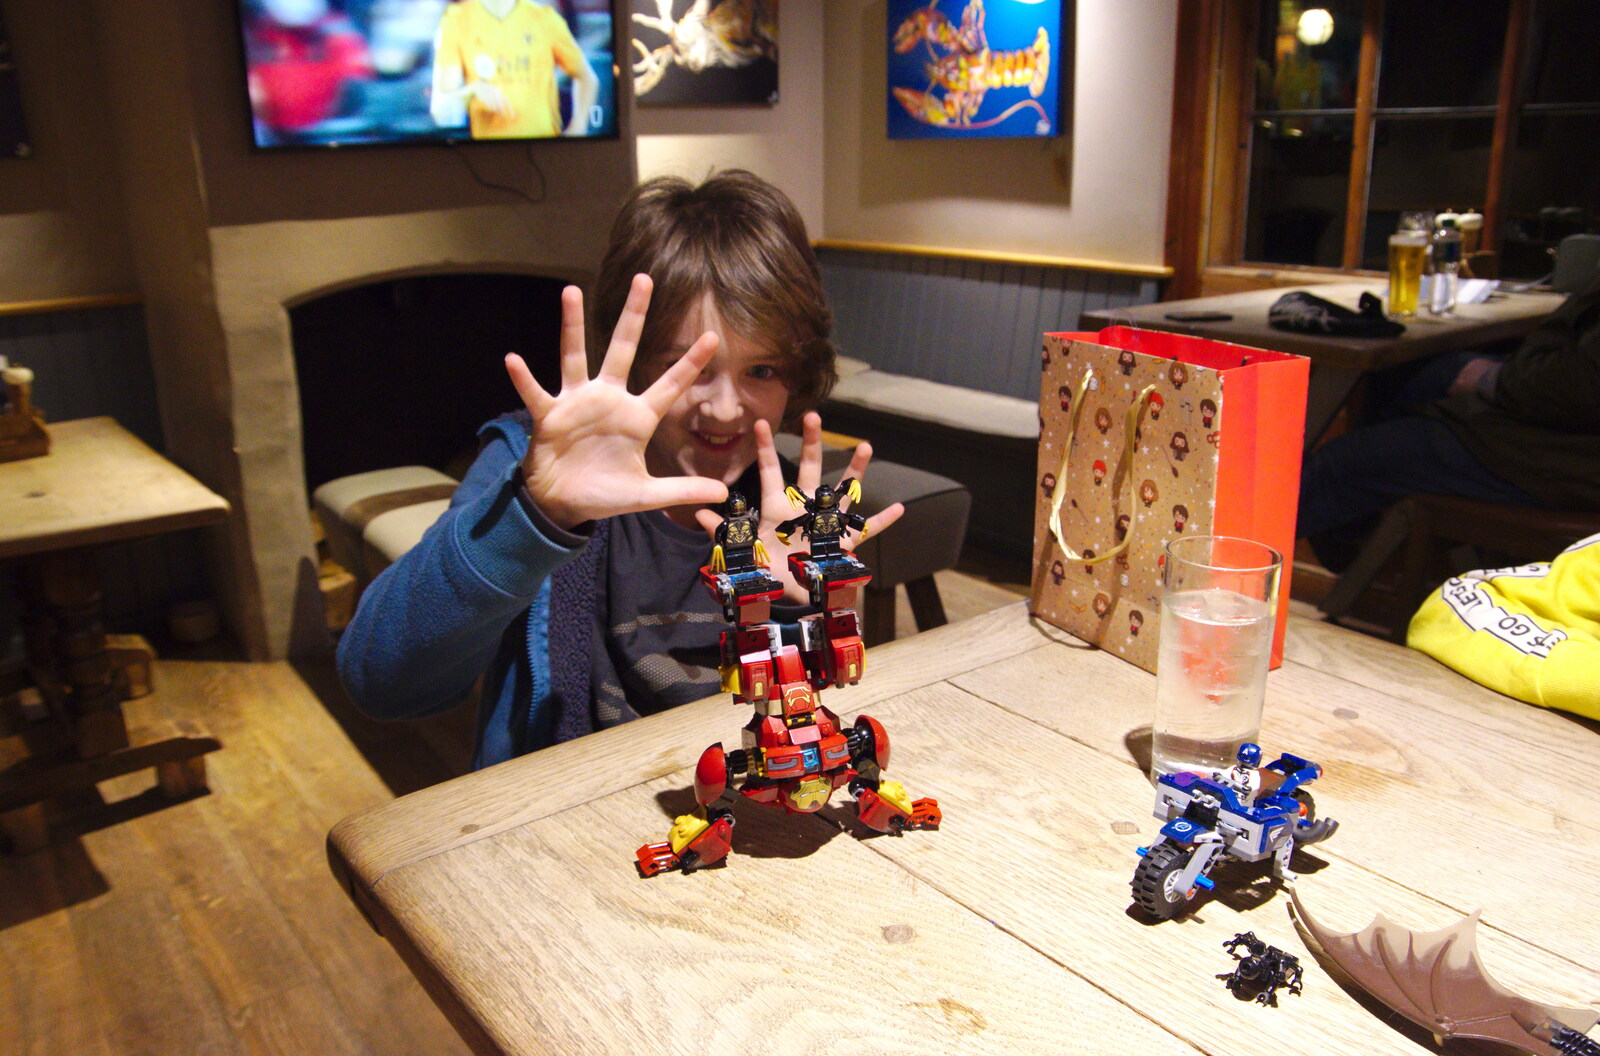 Fred's Lego creation in the Oaksmere bar from Diss Panto and the Christmas Lights, Diss, Norfolk - 27th December 2019